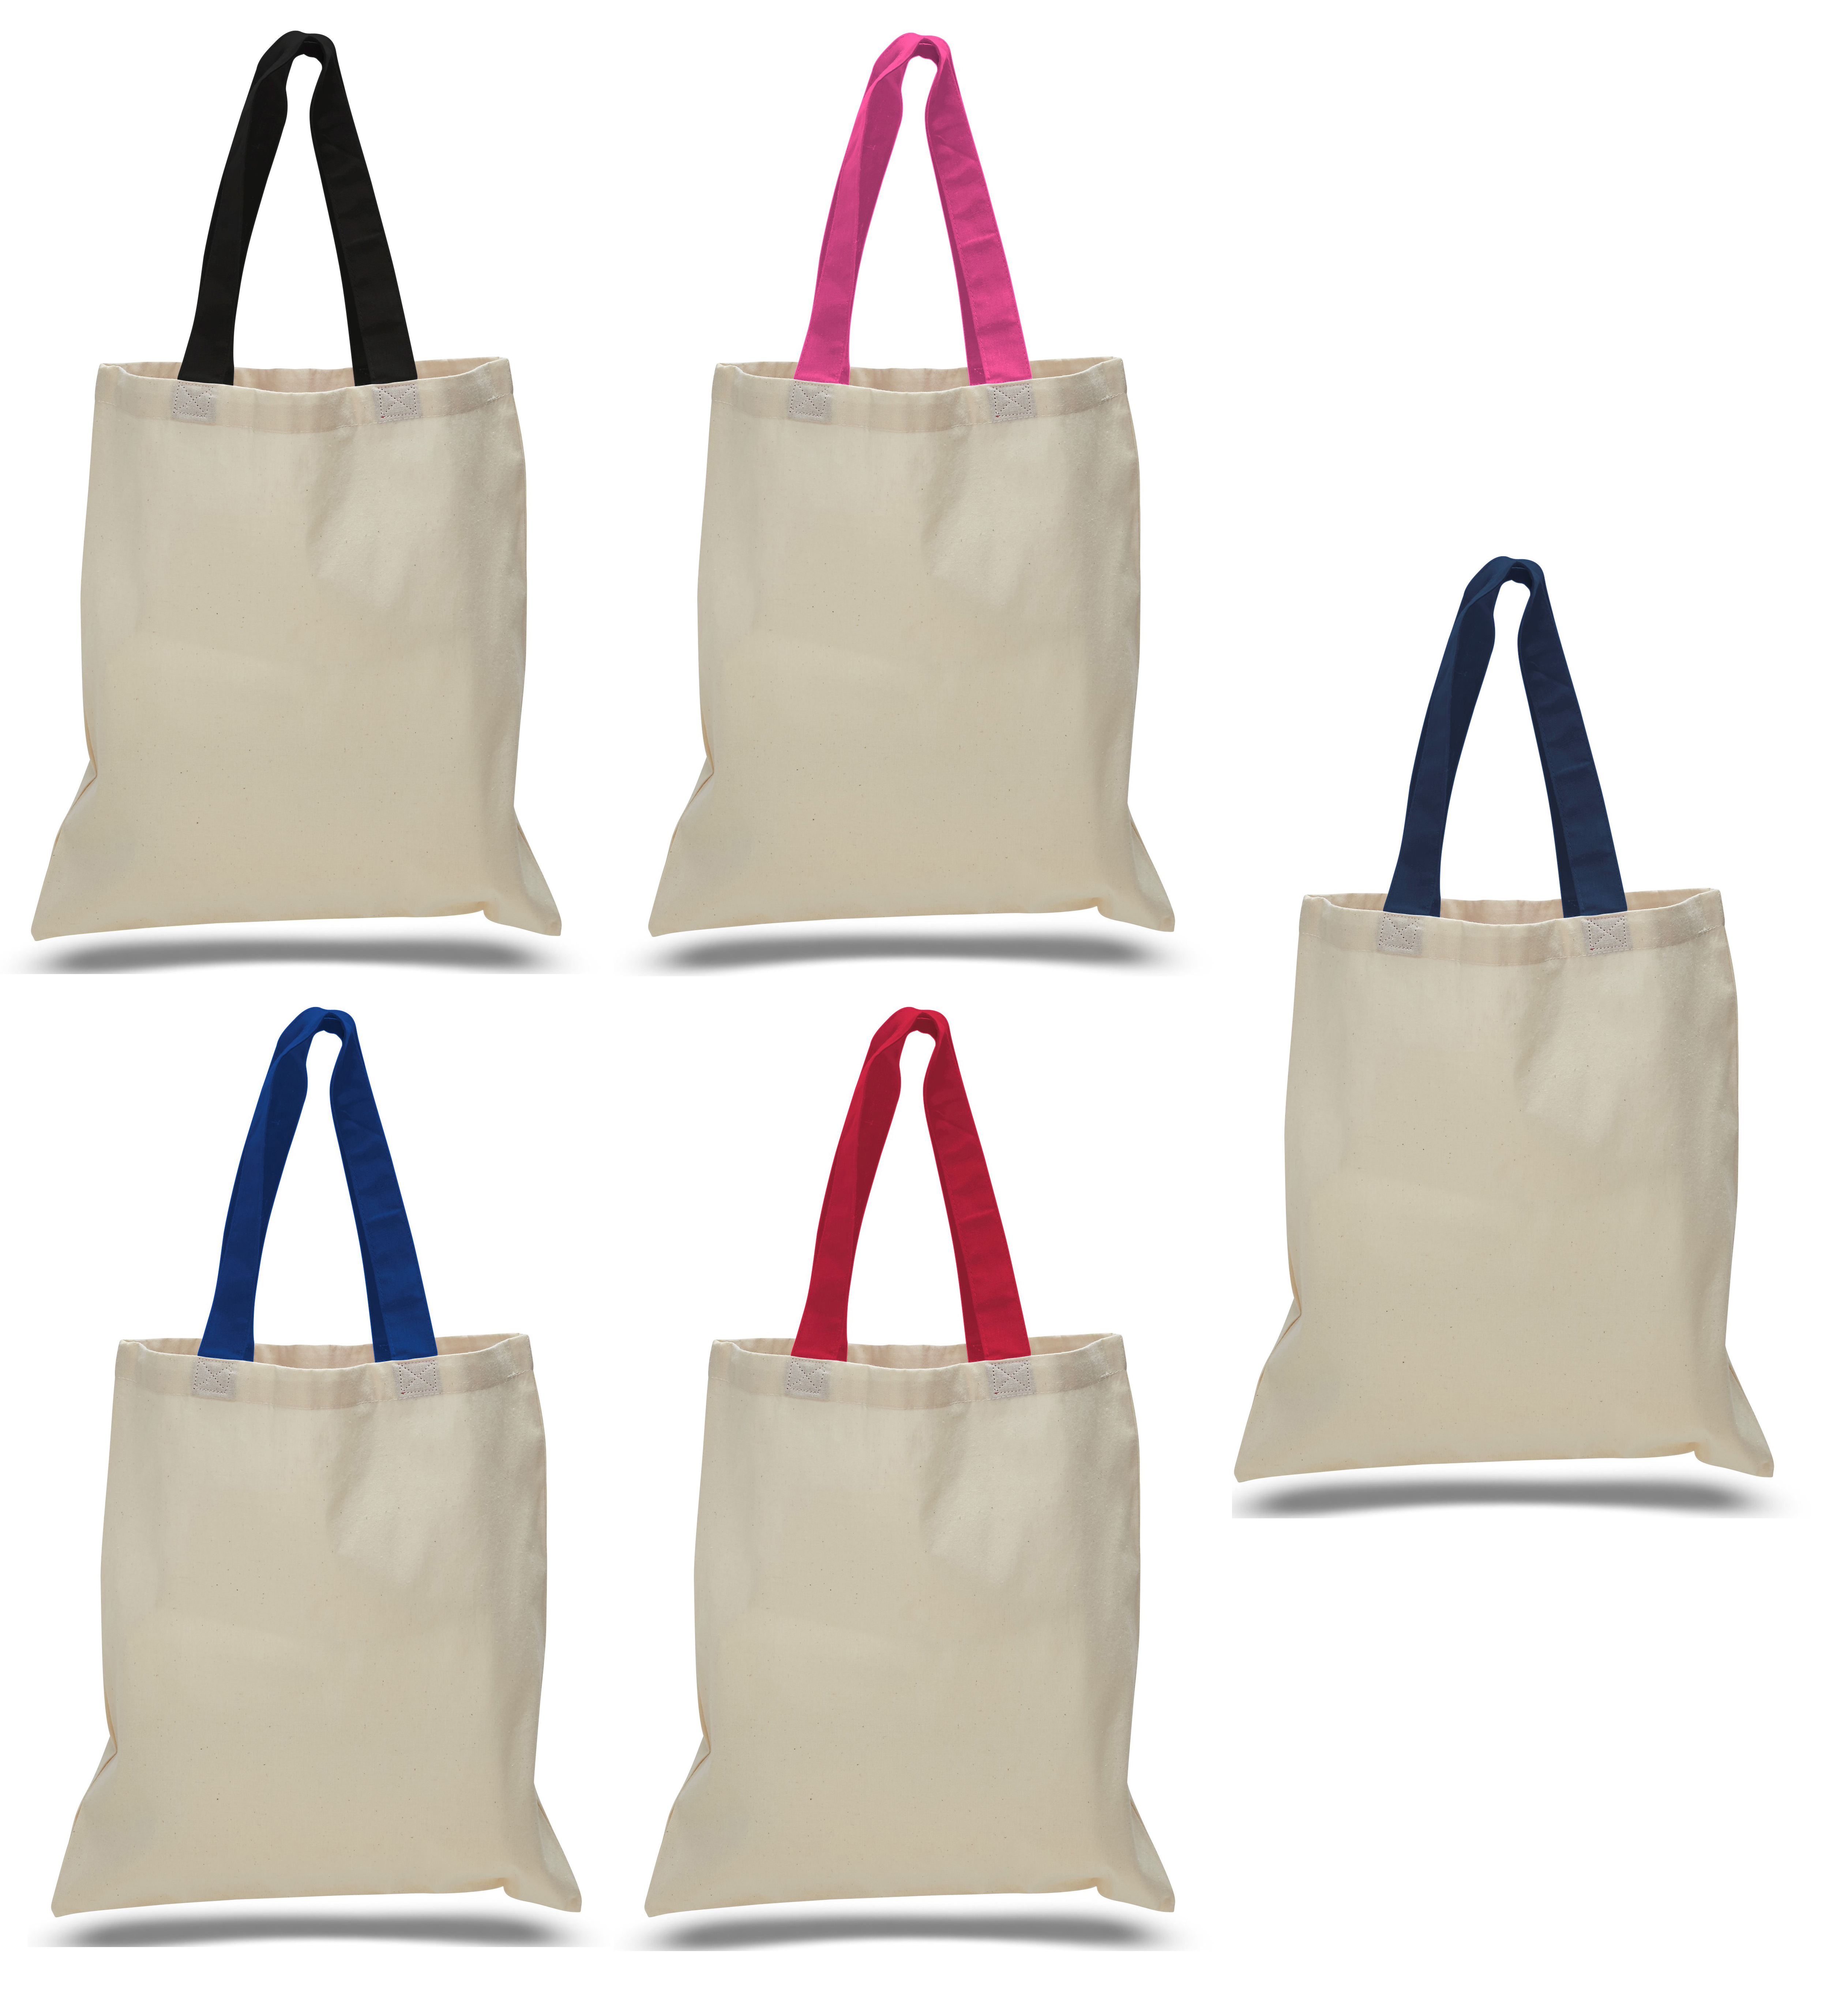 ''15'''' Cotton Canvas Tote Bags w/ Contrasting Handles''